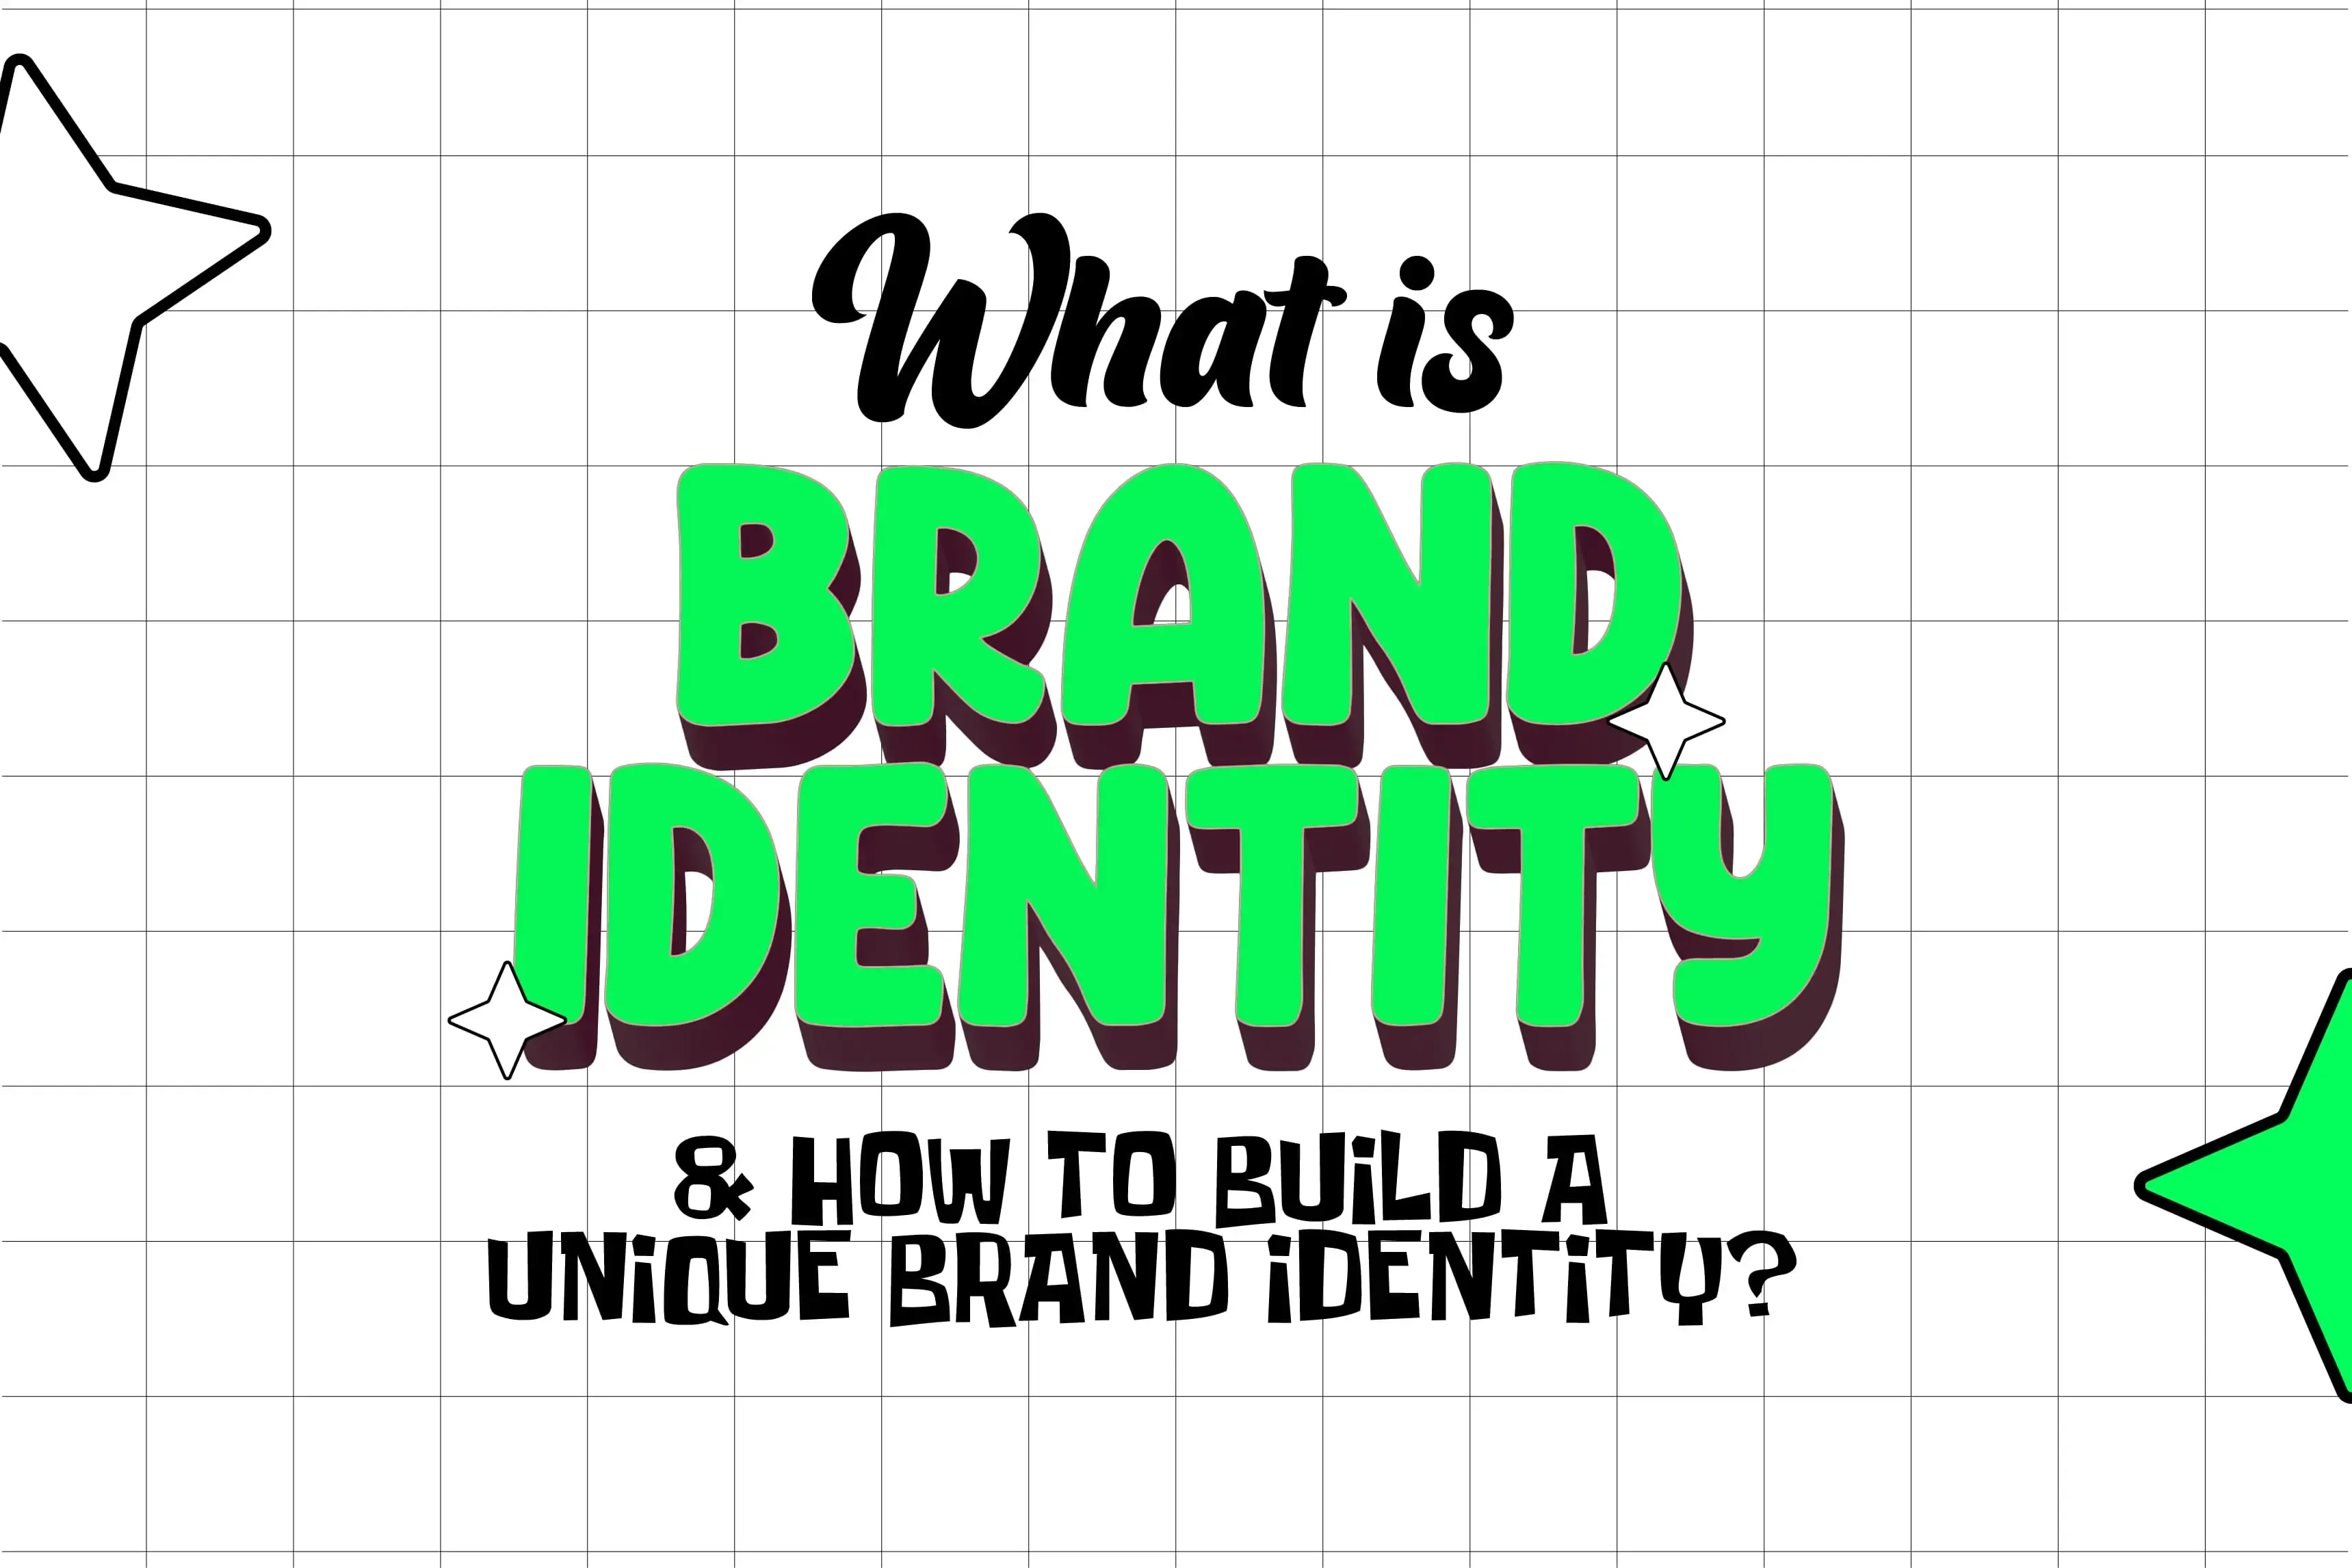 What Is Brand Identity? - Importance & Examples – Feedough